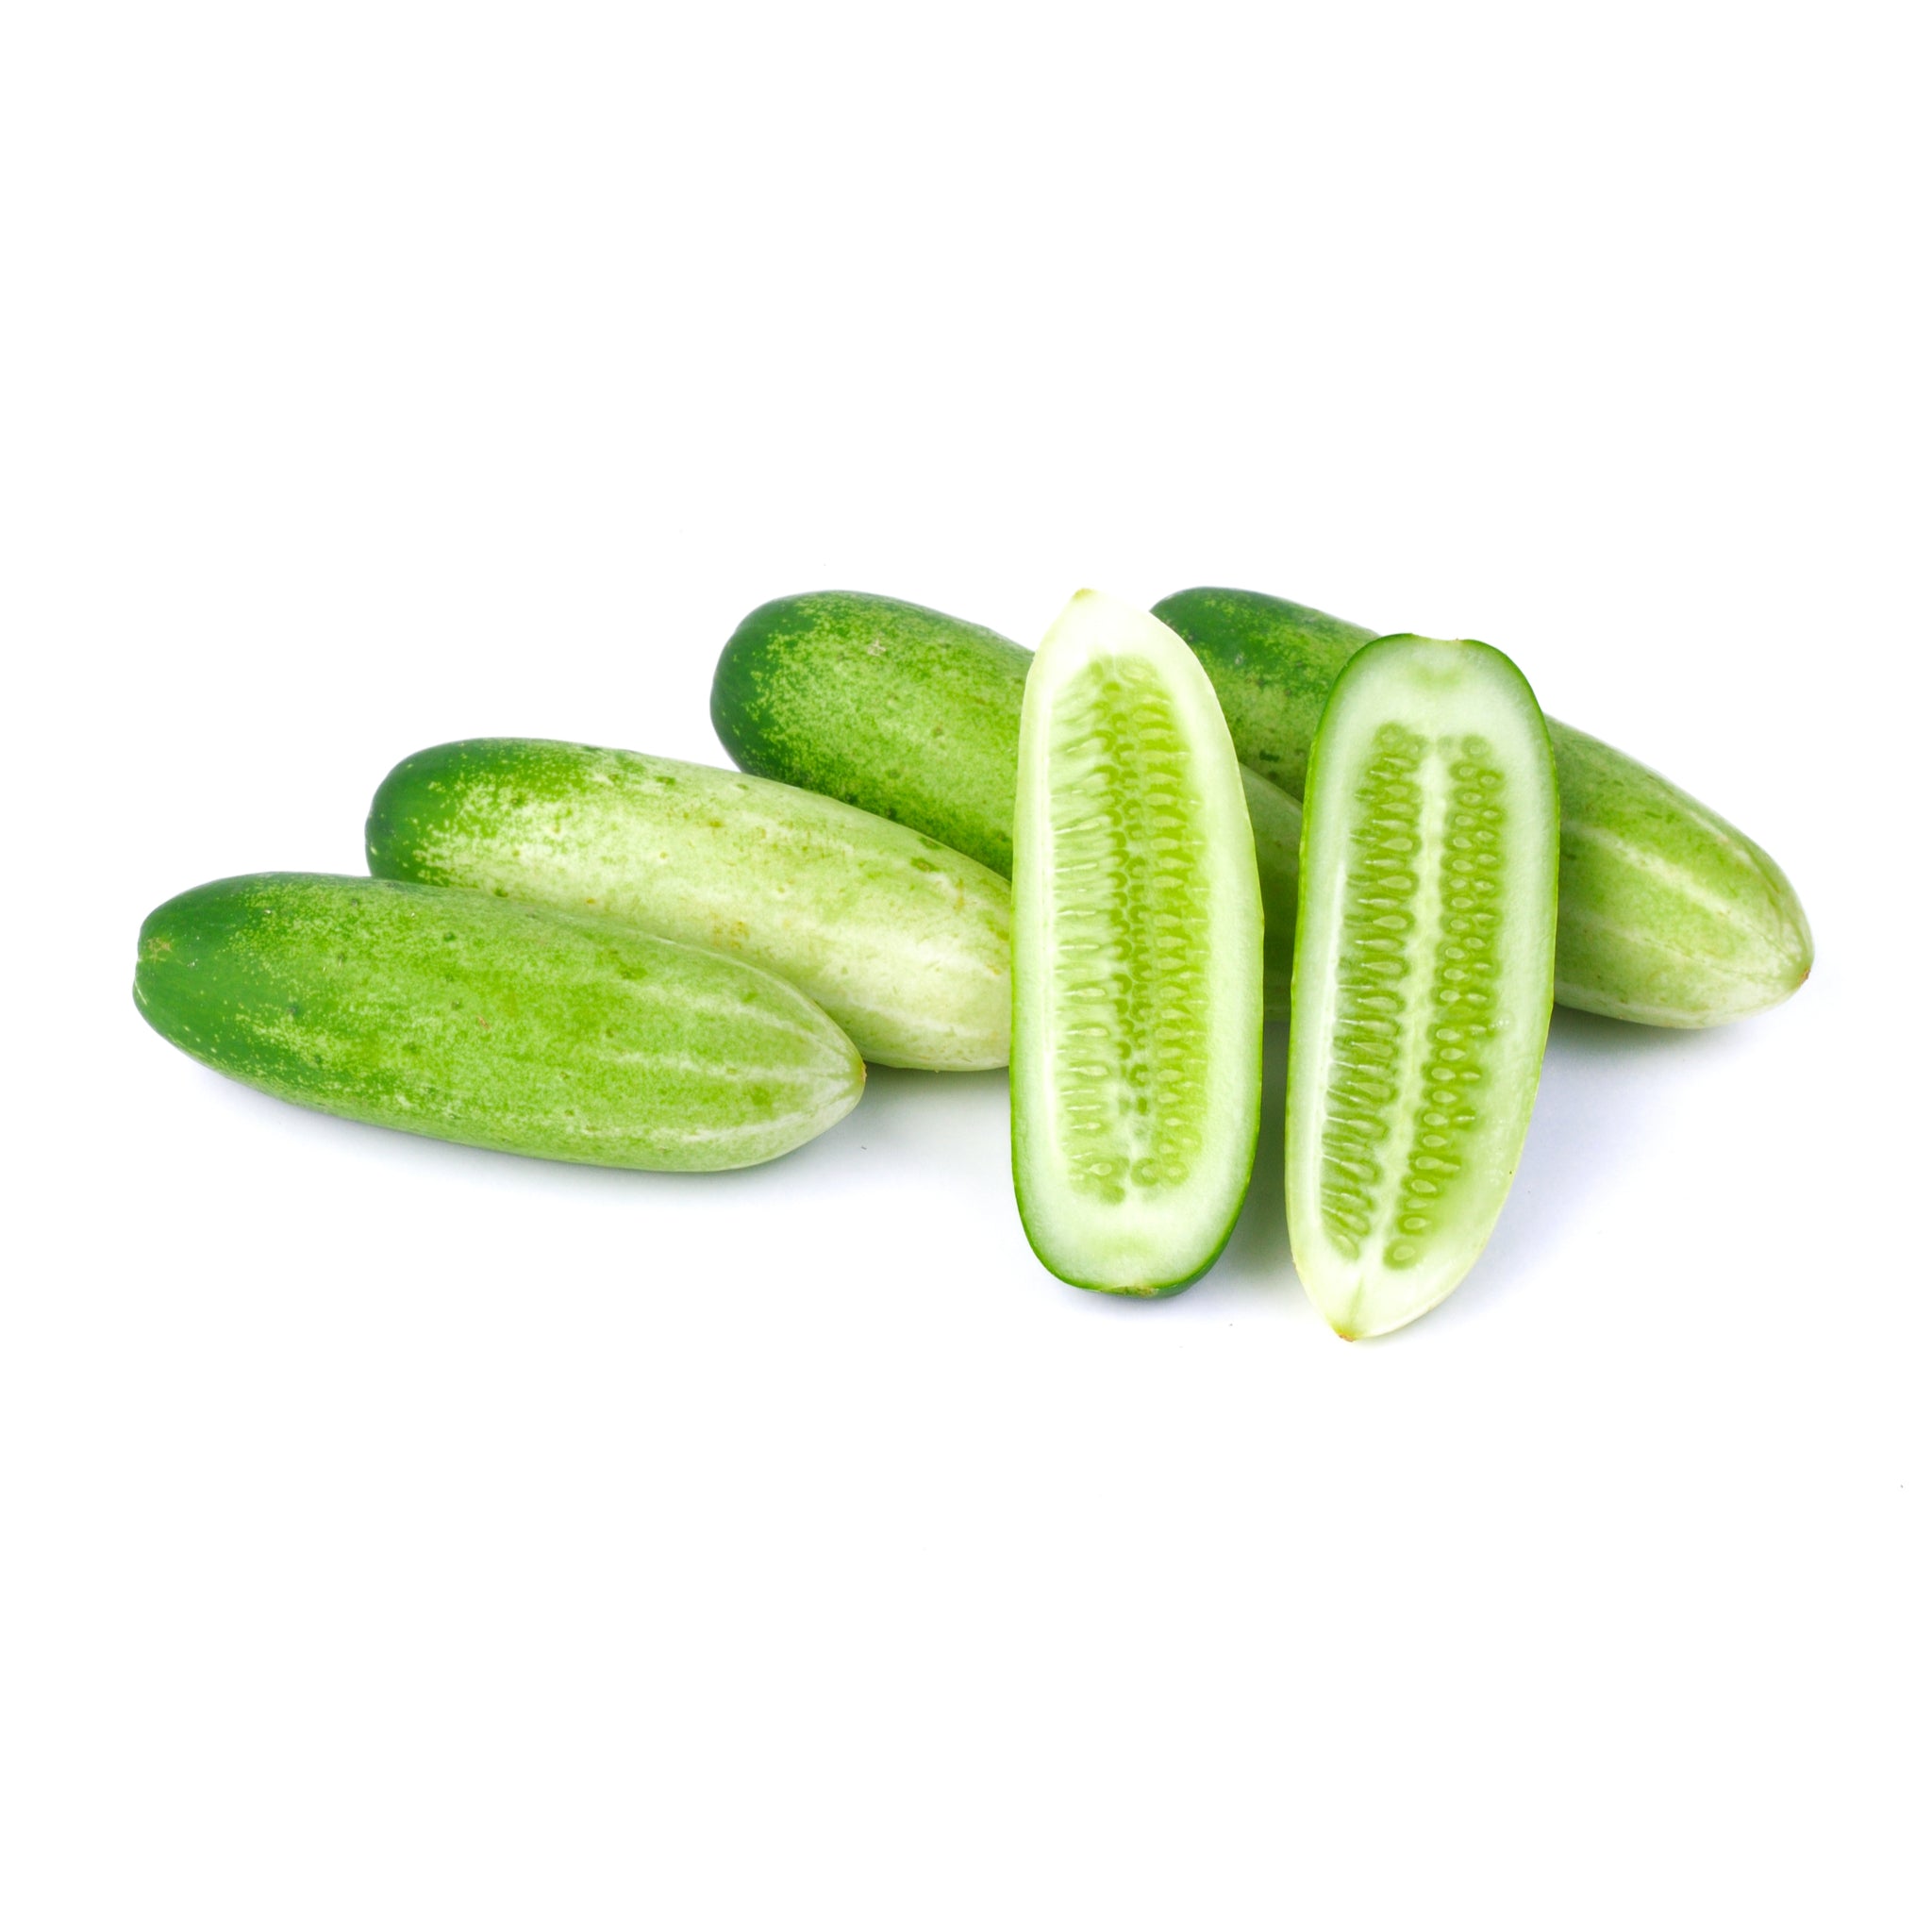 Fresh Thai Cucumber (about 200g) - Imported Weekly from Thailand